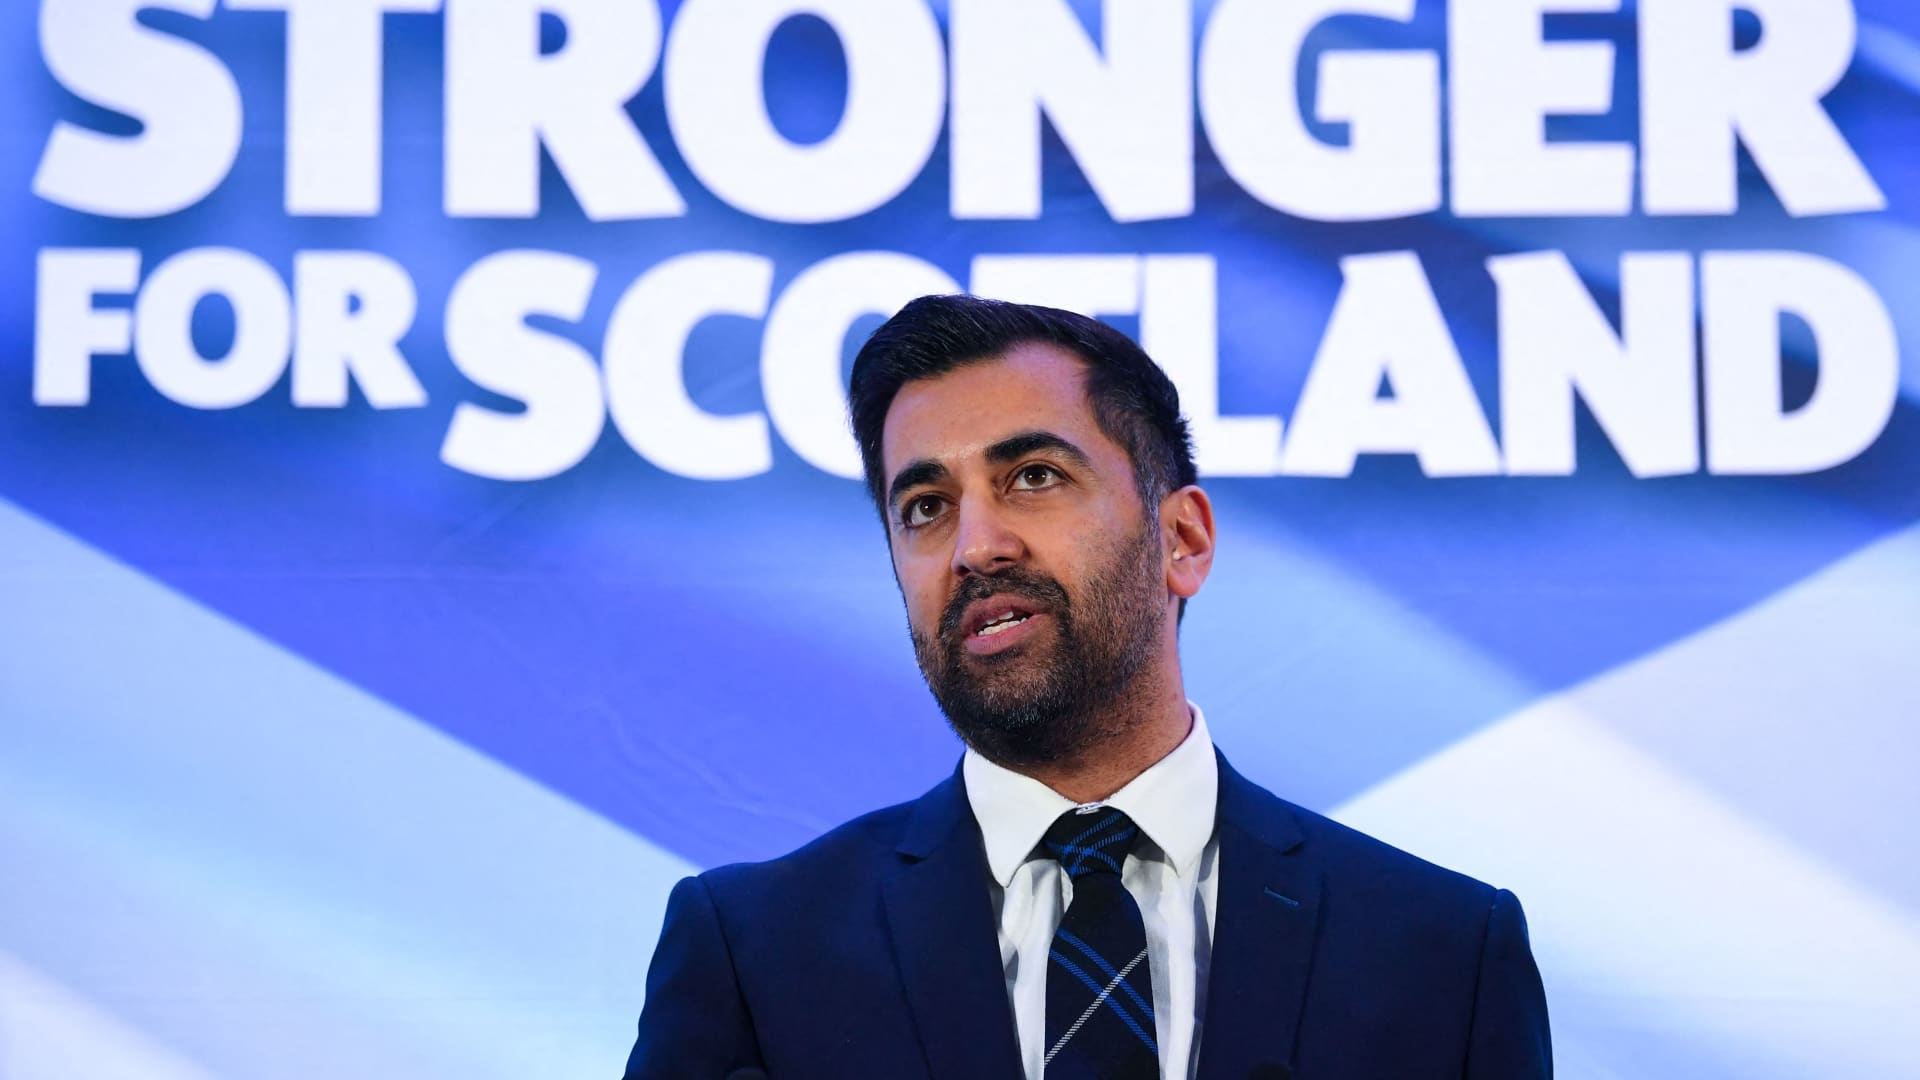 Humza Yousaf Predicts Tight Race Between Nationalists and Conservatives